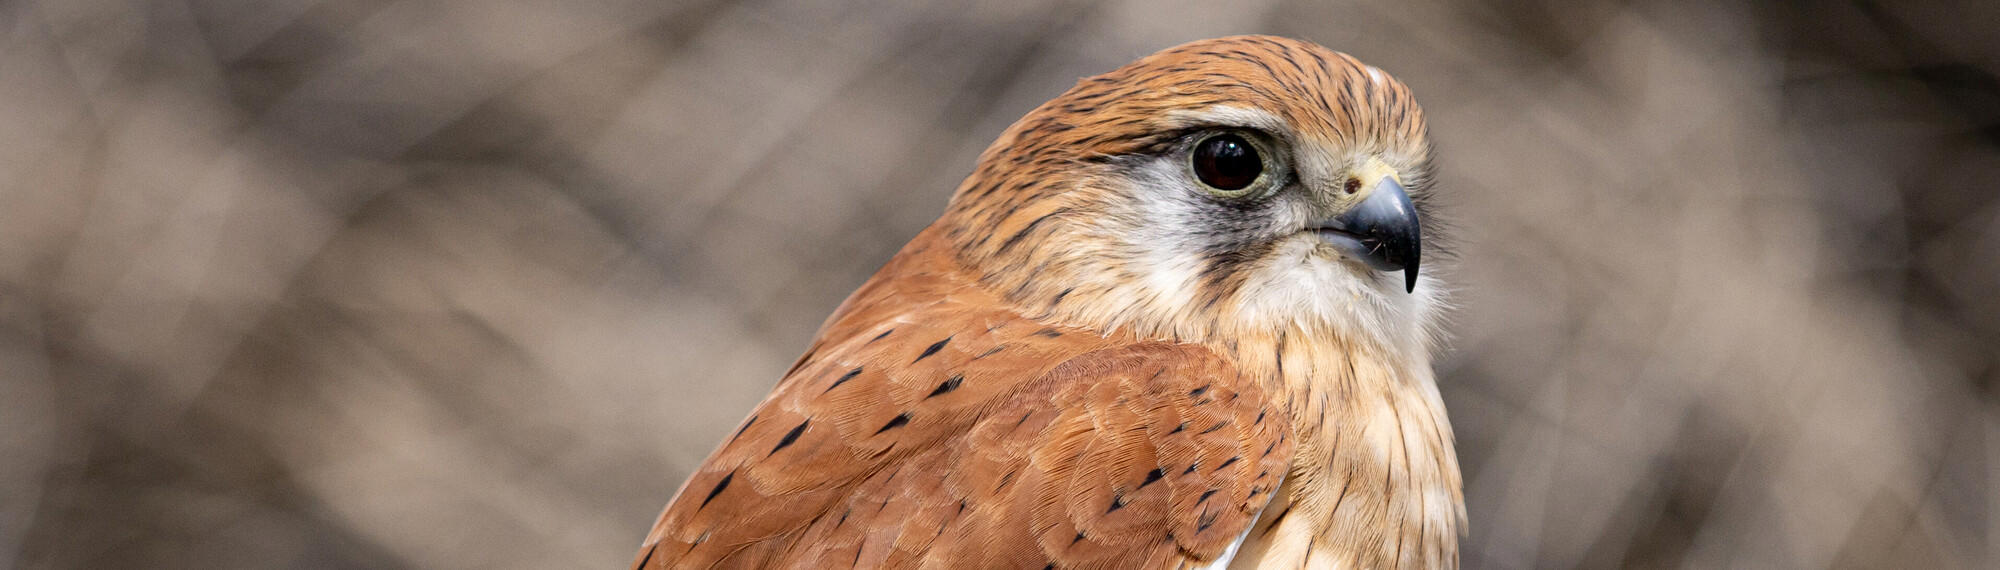 Close up view of a Nankeen Kestrel from chest high up with its brown feathers with black speckles on its wings and black eyes and beak